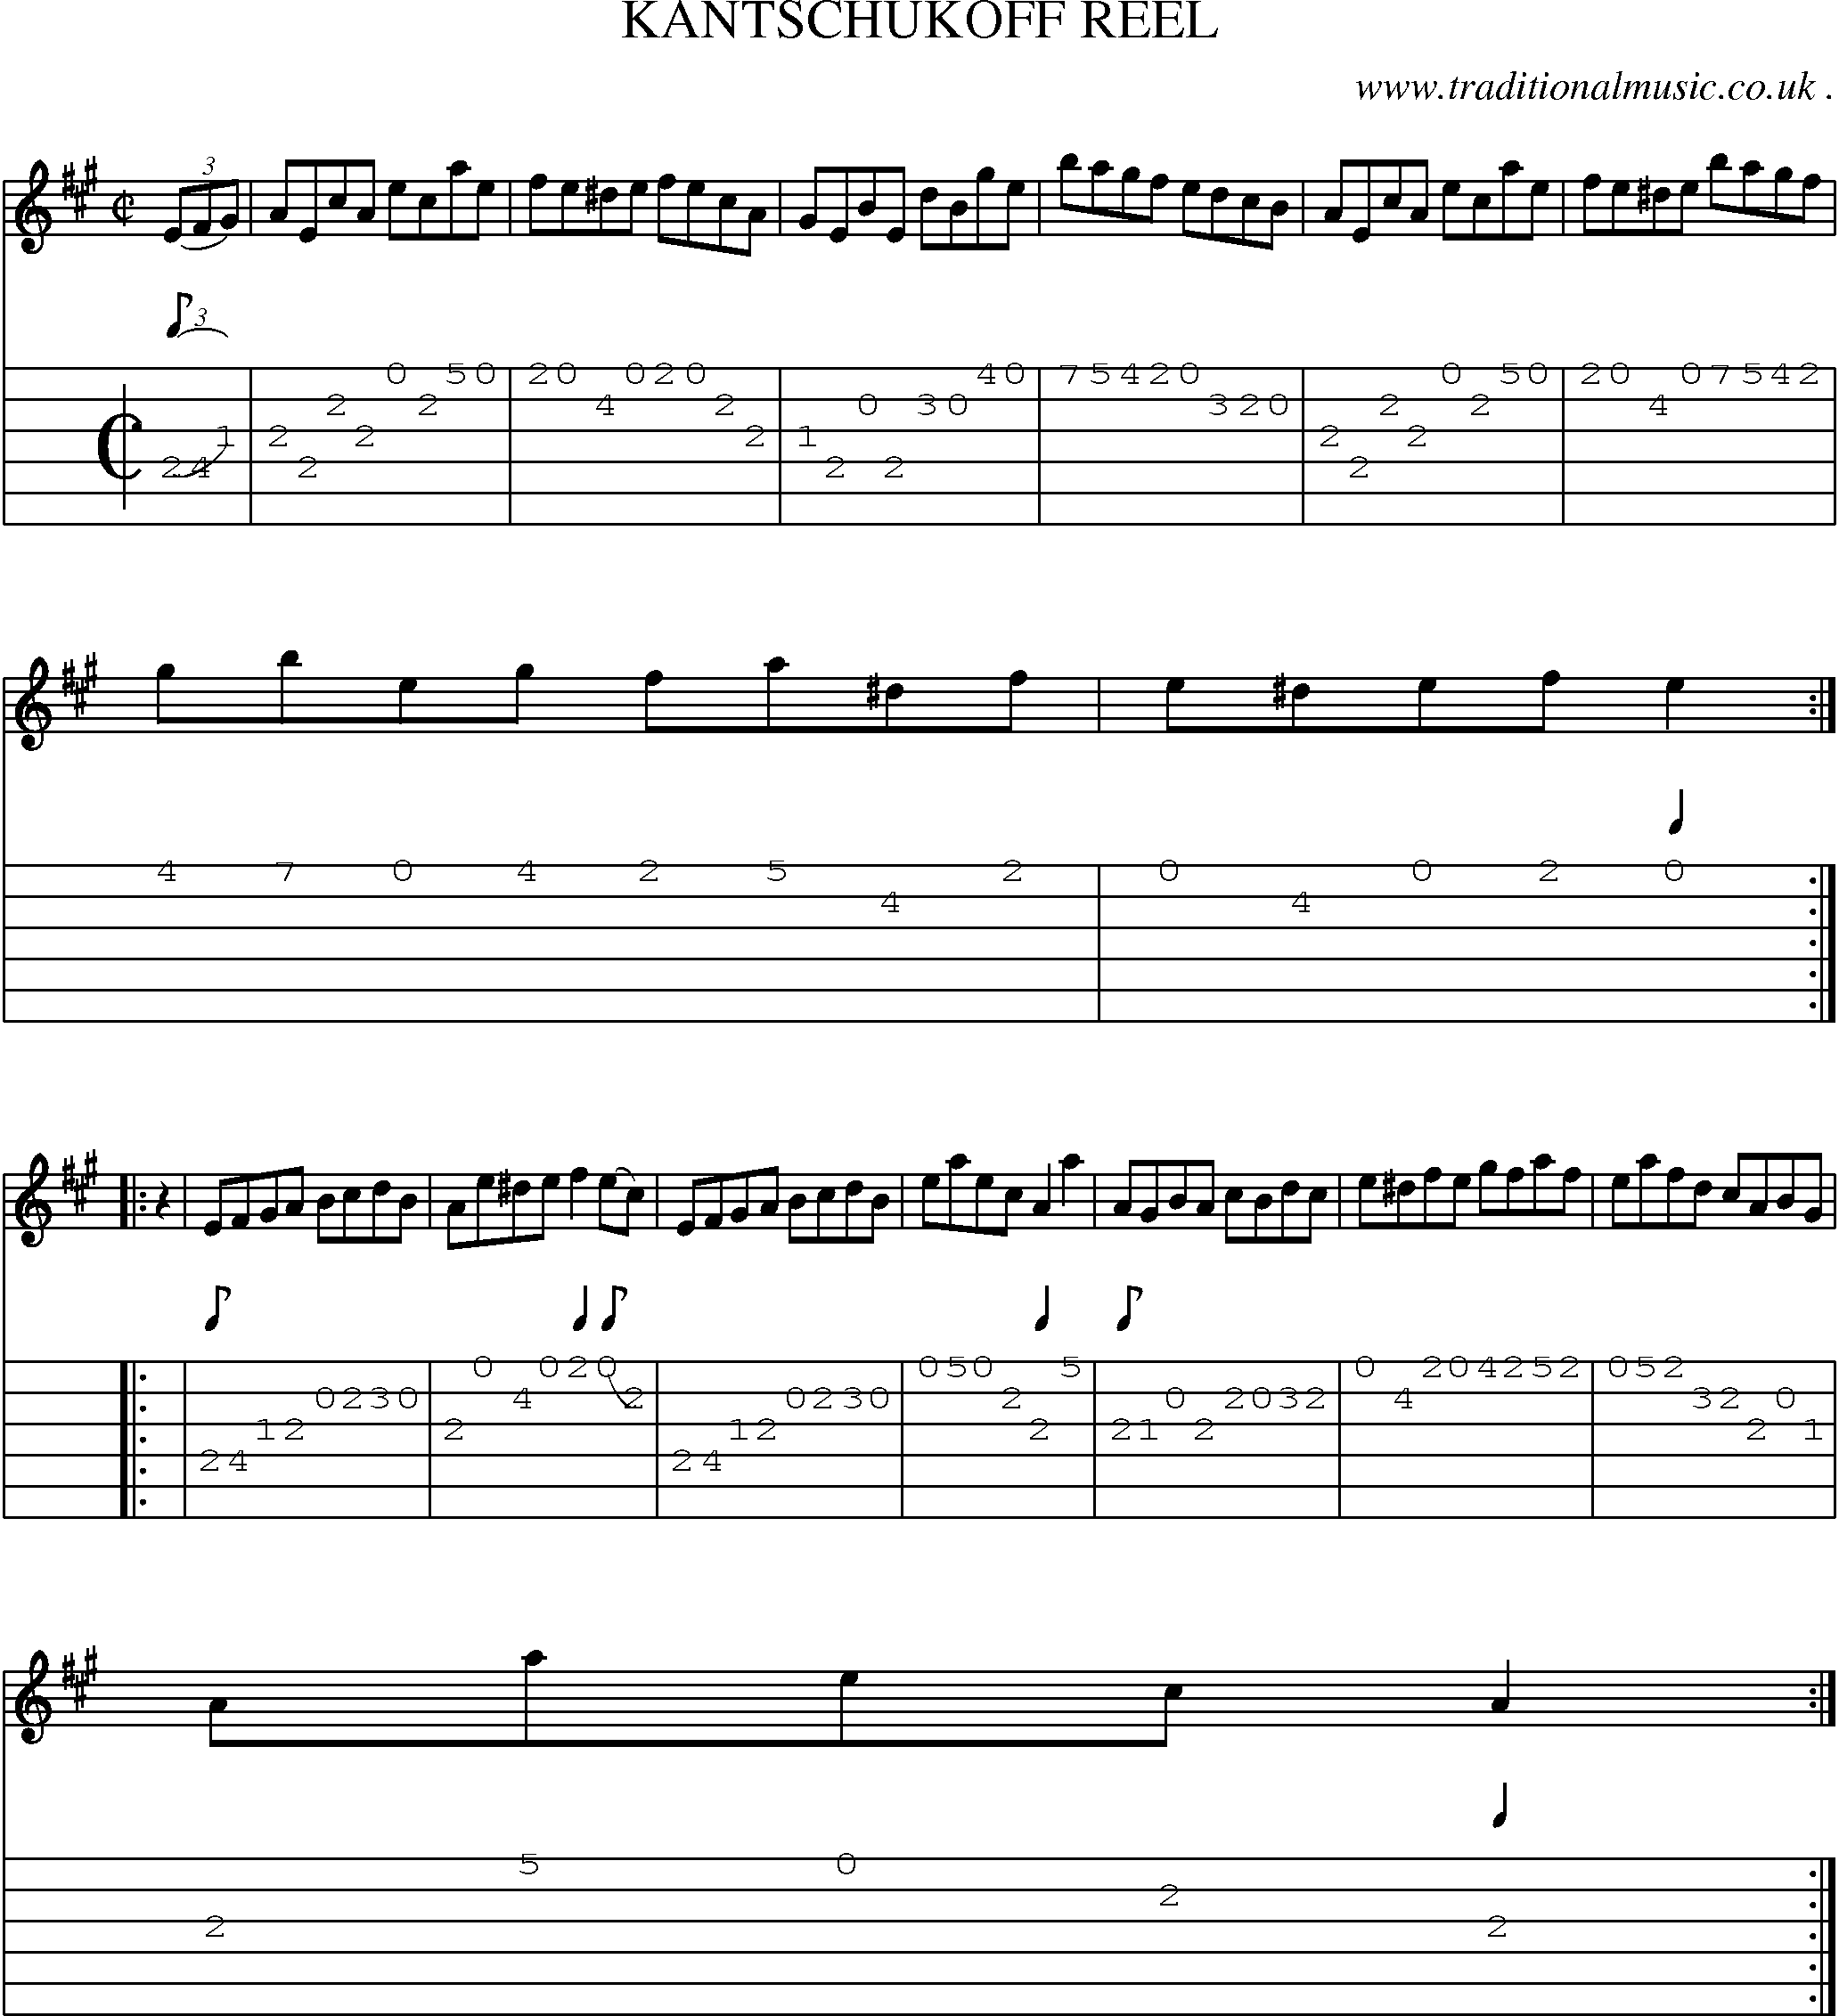 Sheet-Music and Guitar Tabs for Kantschukoff Reel